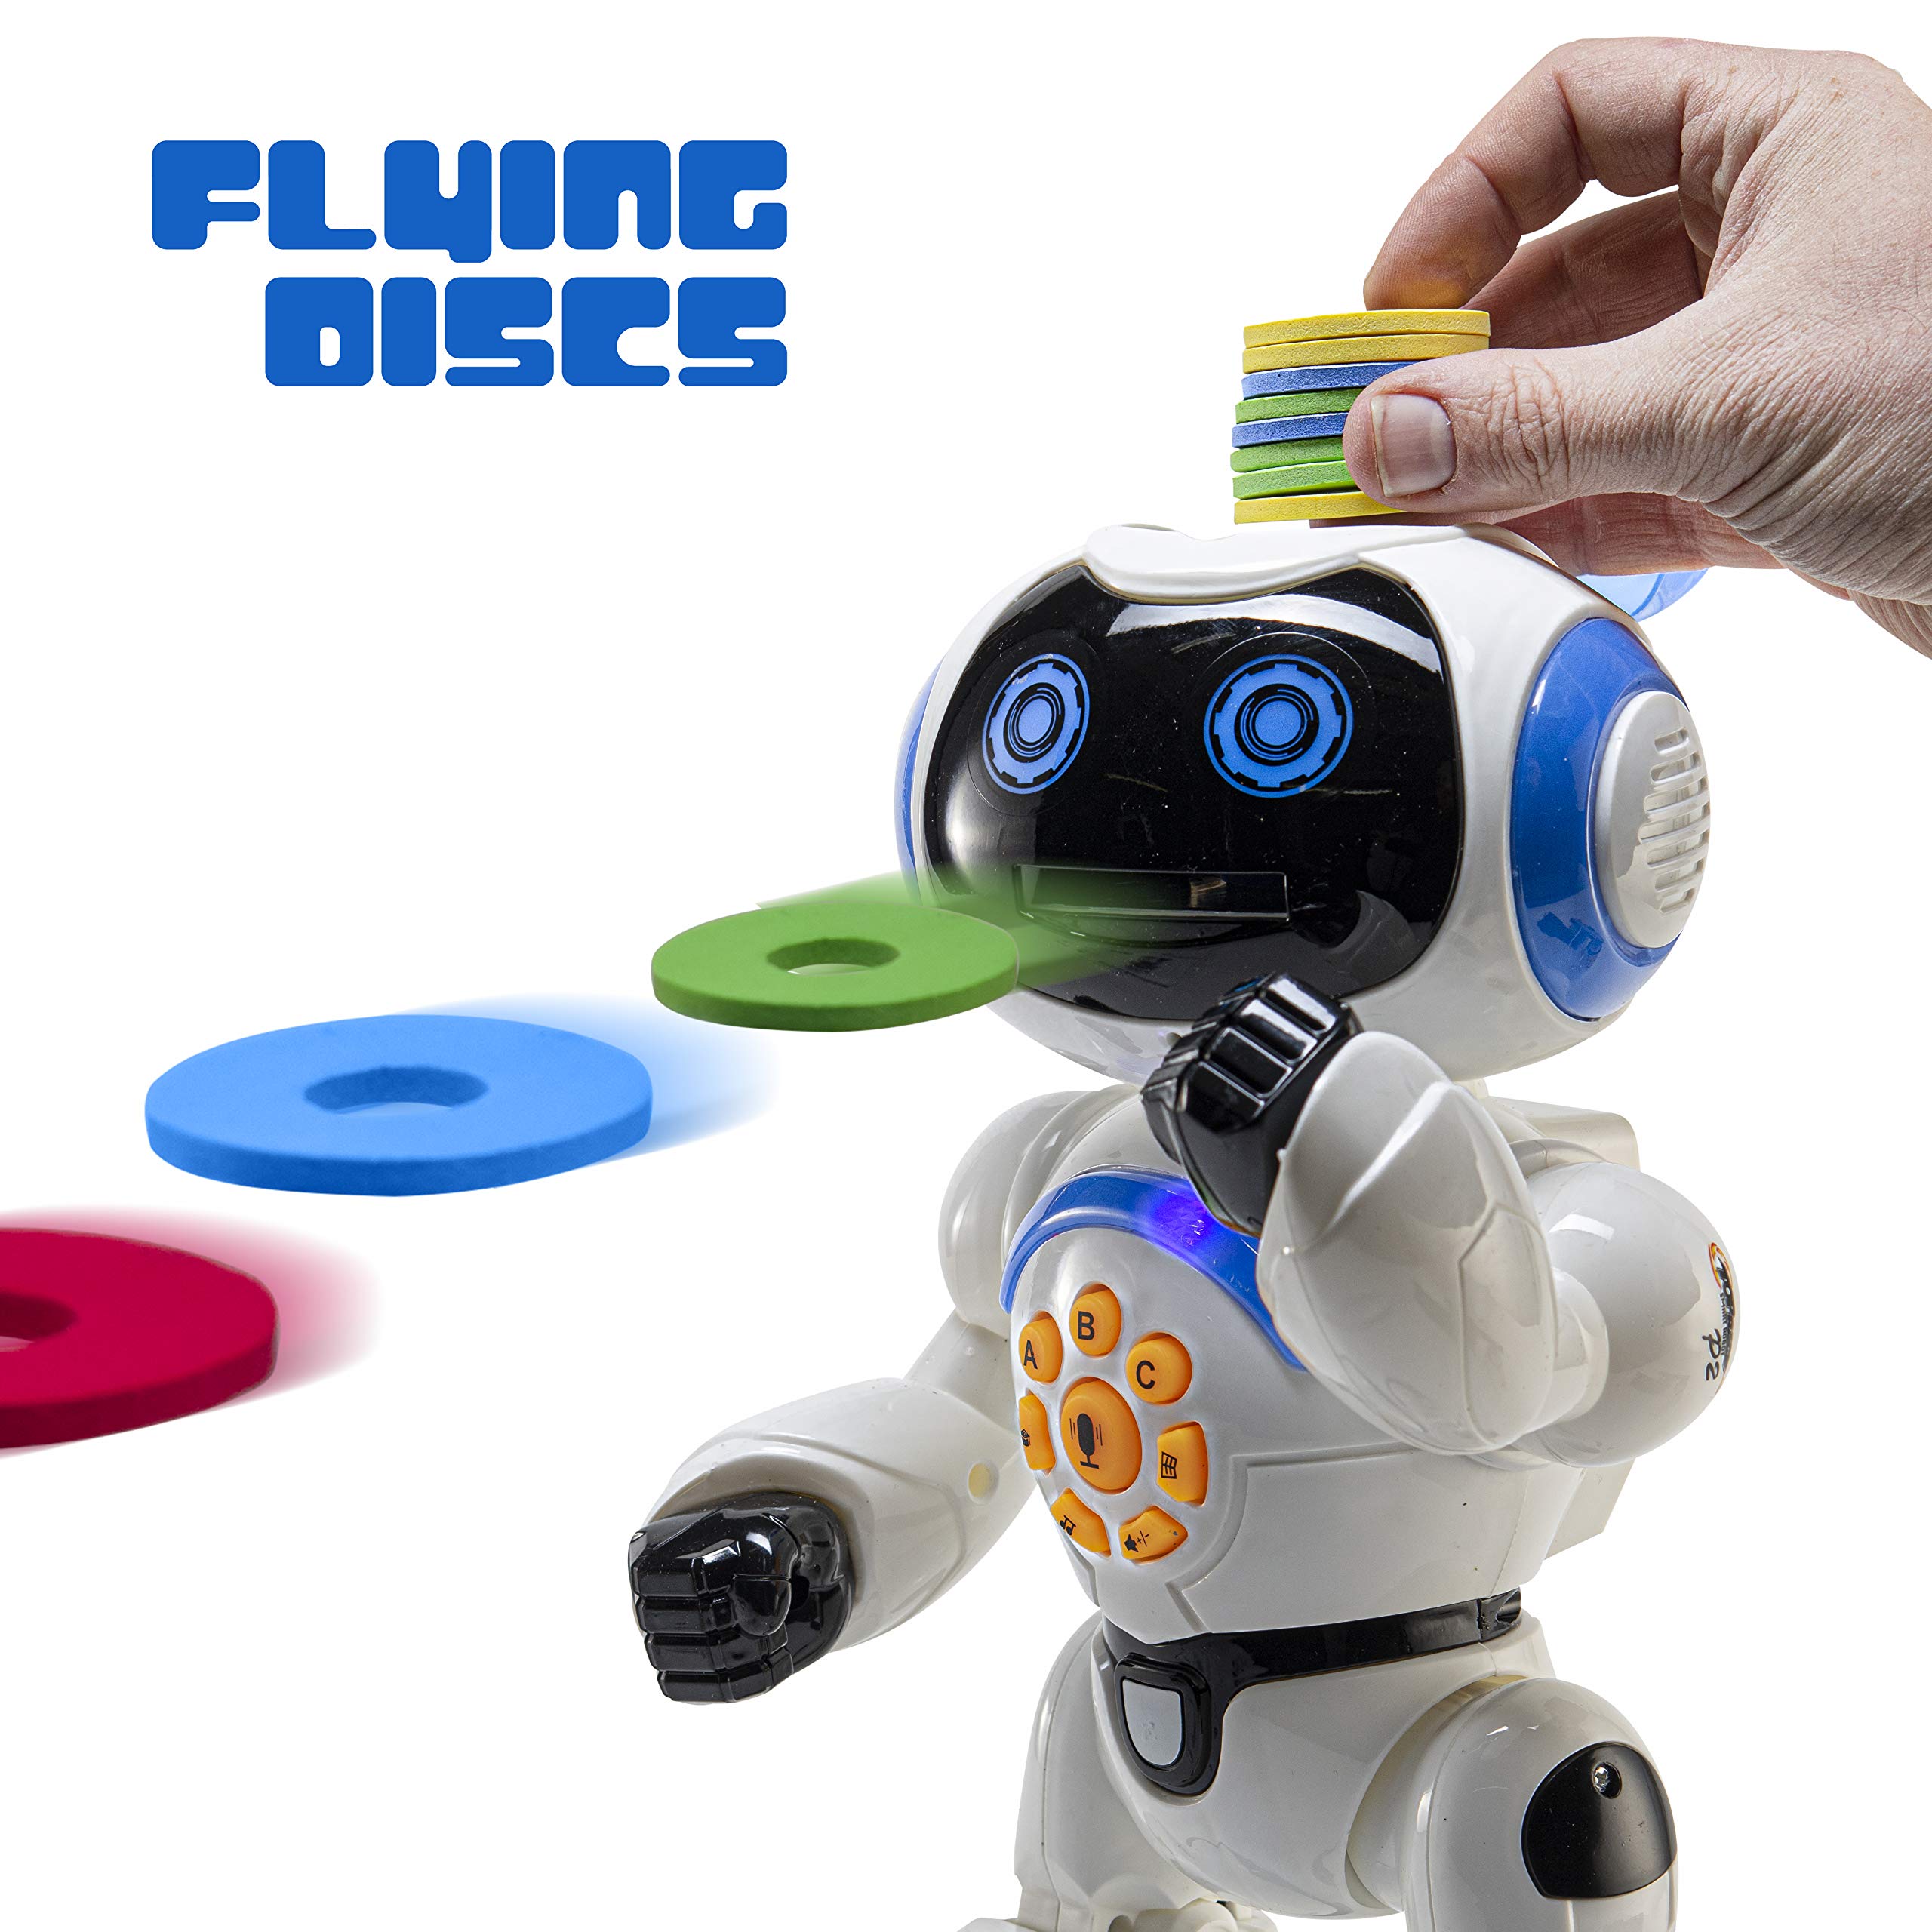 Top Race Remote Control Robot Toys with LED Lights - Interactive Programmable Birthday Gift for Kids - Moving, Dancing, Talking and Play Flying Disc - Rechargeable 12